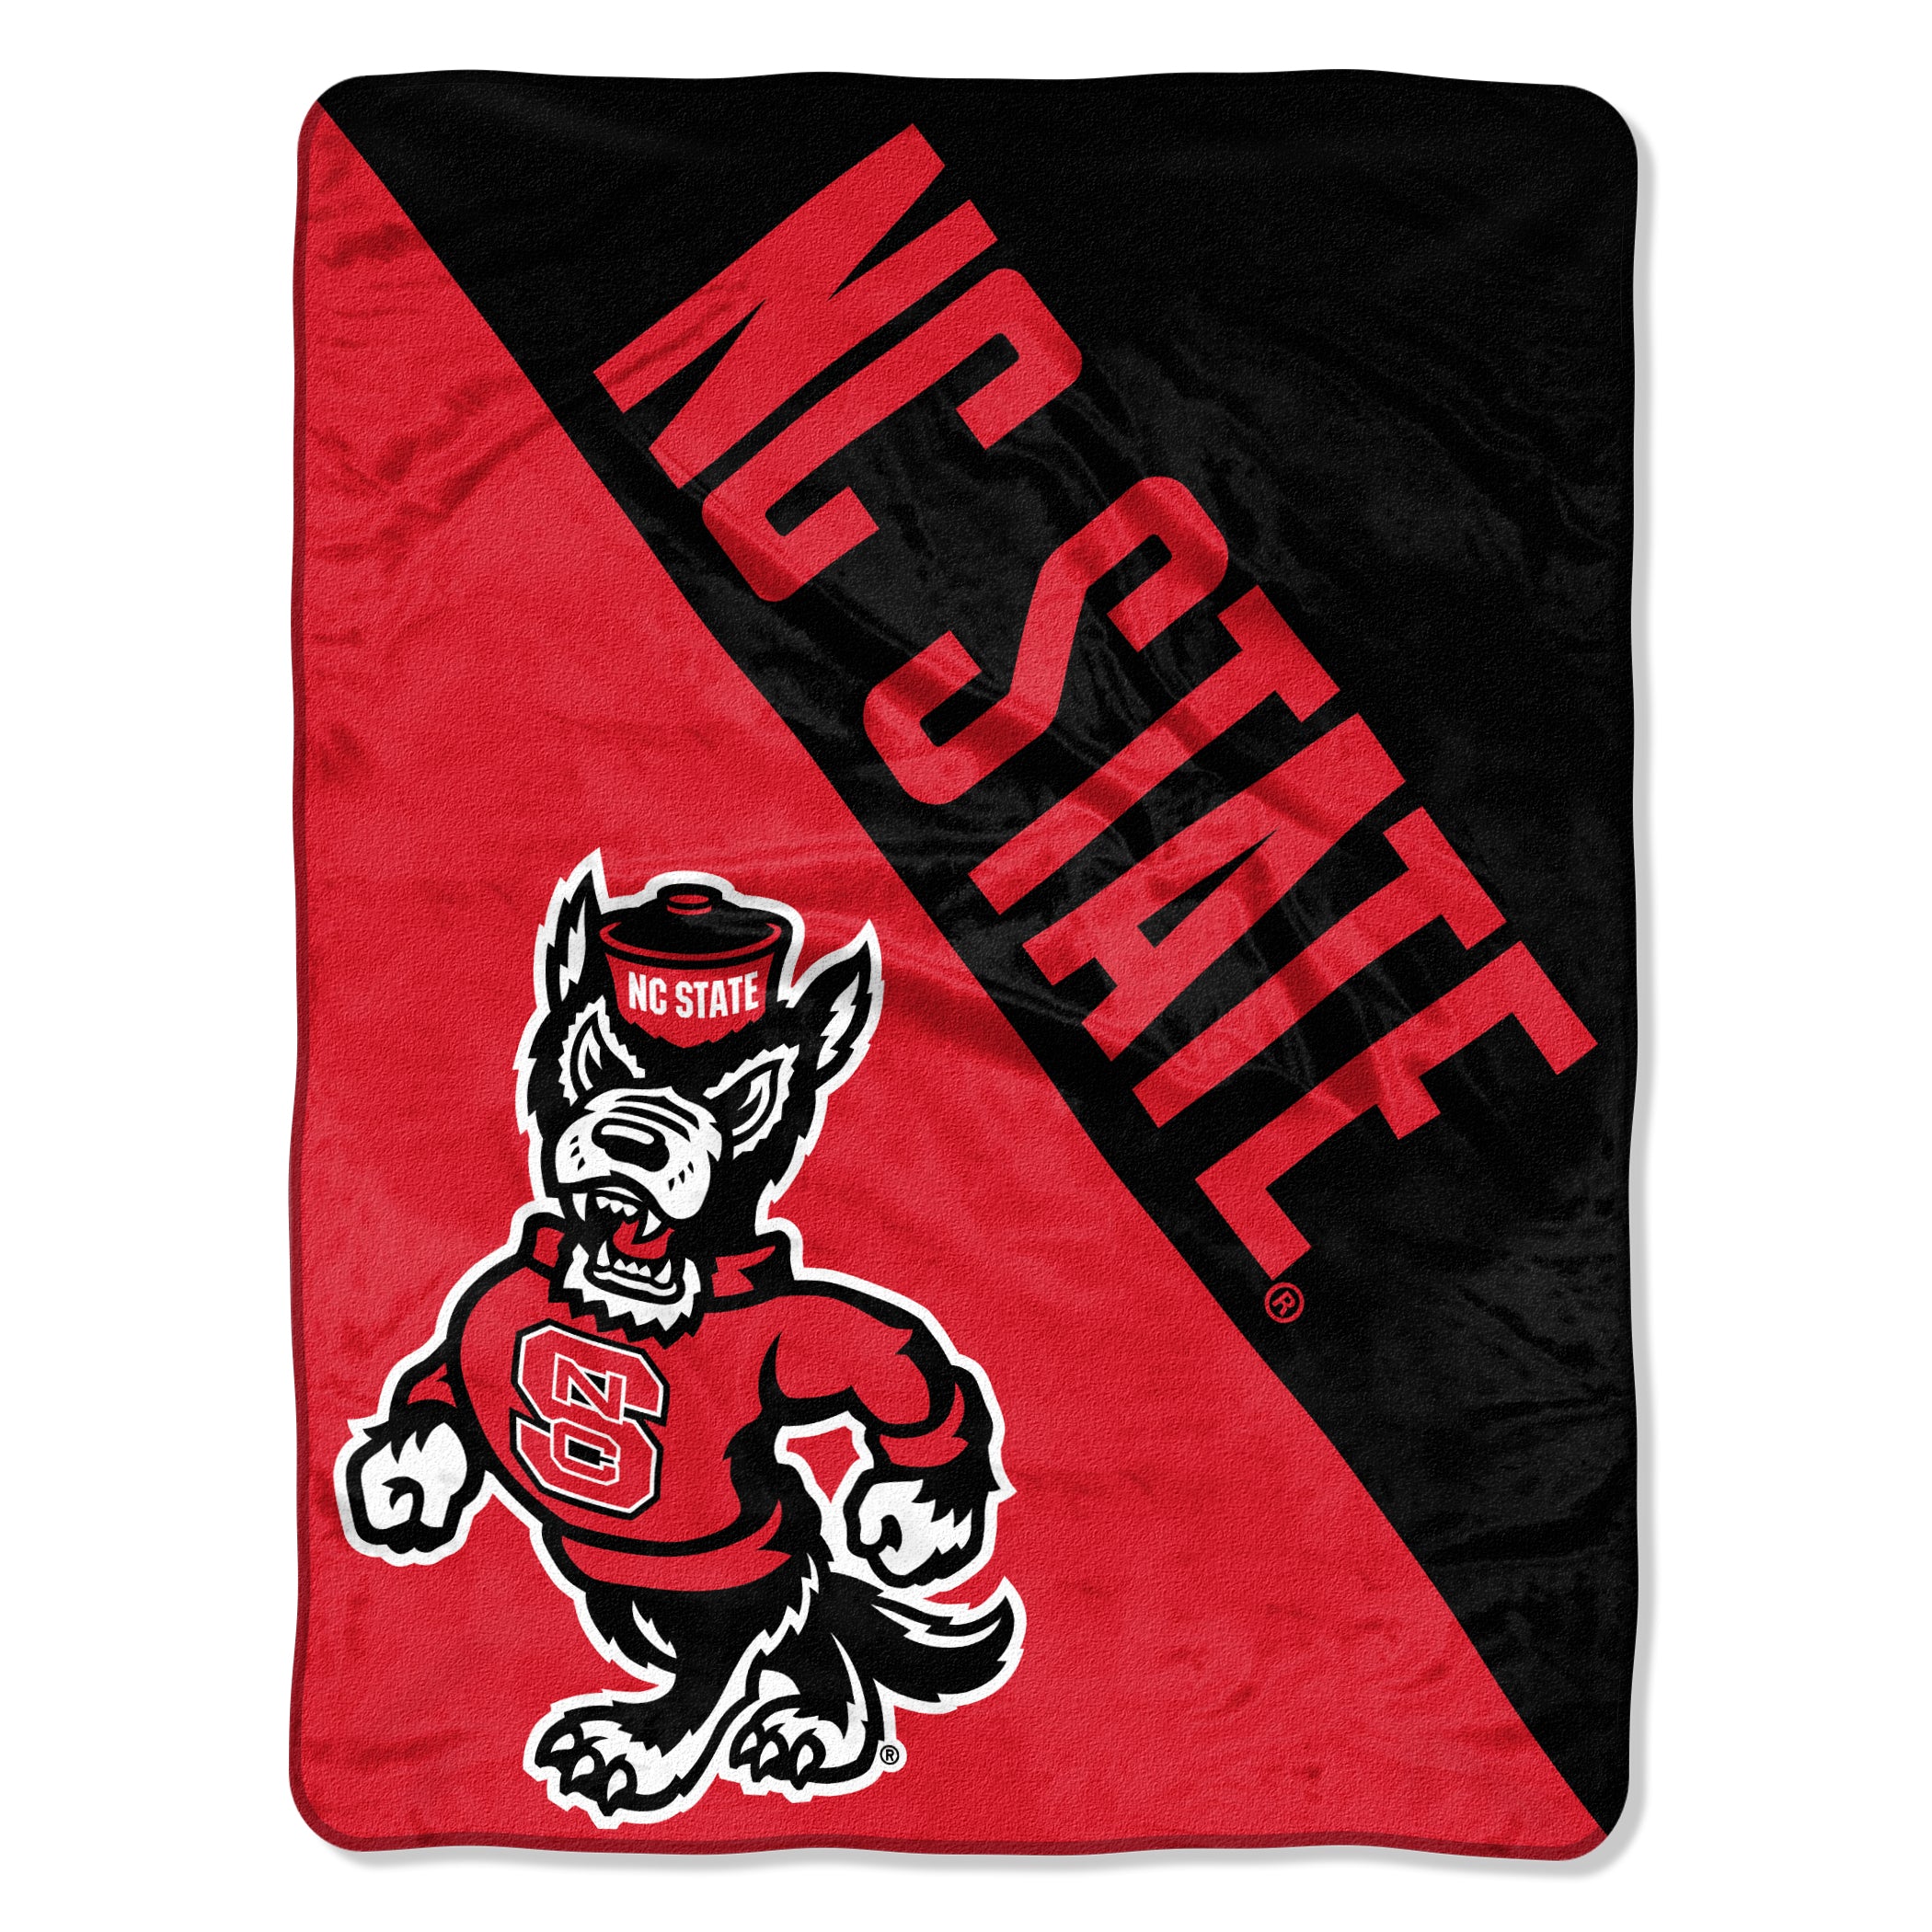 North Carolina State Wolfpack Blanket 46x60 Micro Raschel Halftone Design Rolled - Special Order